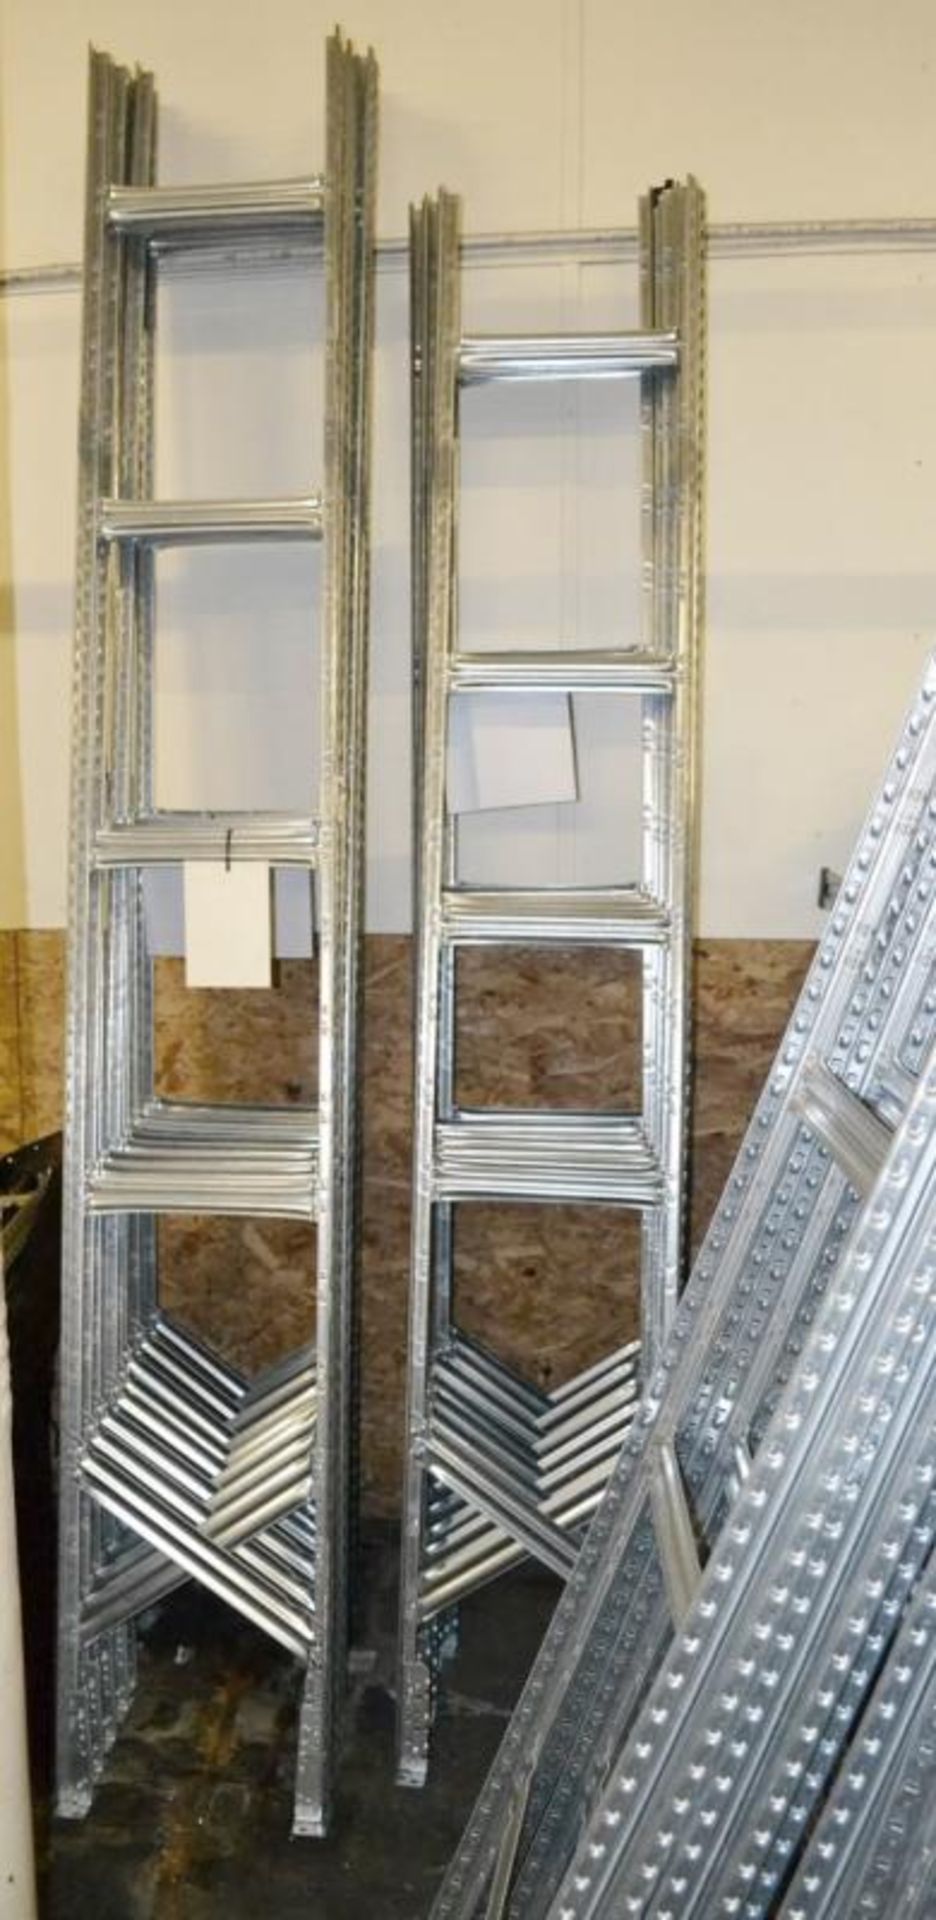 4 x Bays of Metalsistem Steel Modular Storage Shelving - Includes 65 Pieces - Recently Removed - Image 9 of 17